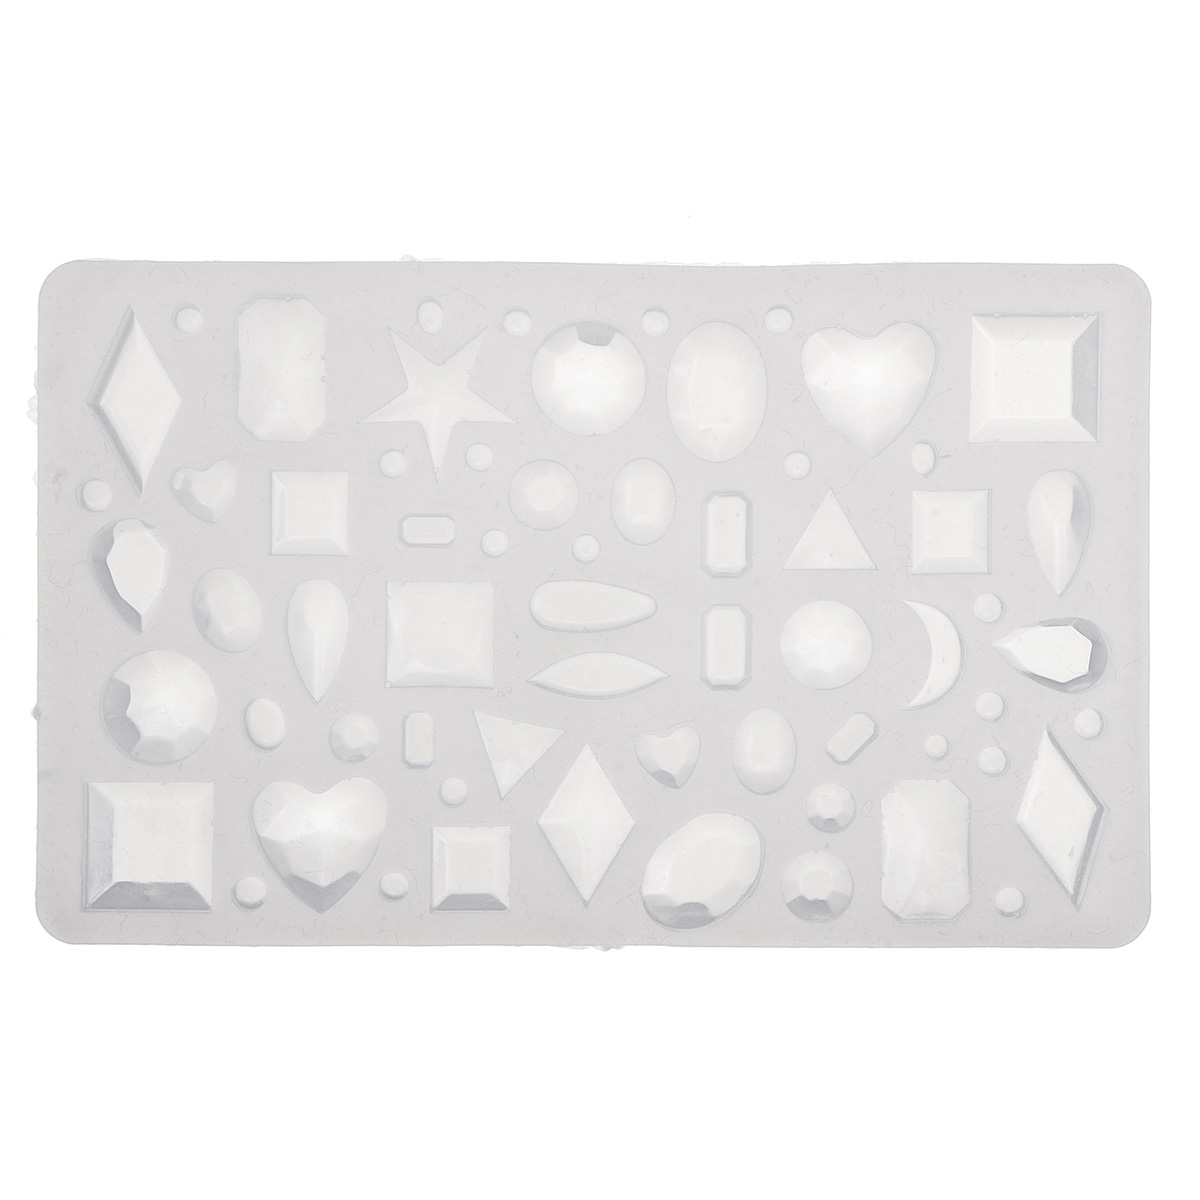 141Pcs-DIY-Silicone-Resin-Casting-Molds-Pendant-Making-Necklace-Mould-Hand-Craft-Tools-Kit-1519269-5